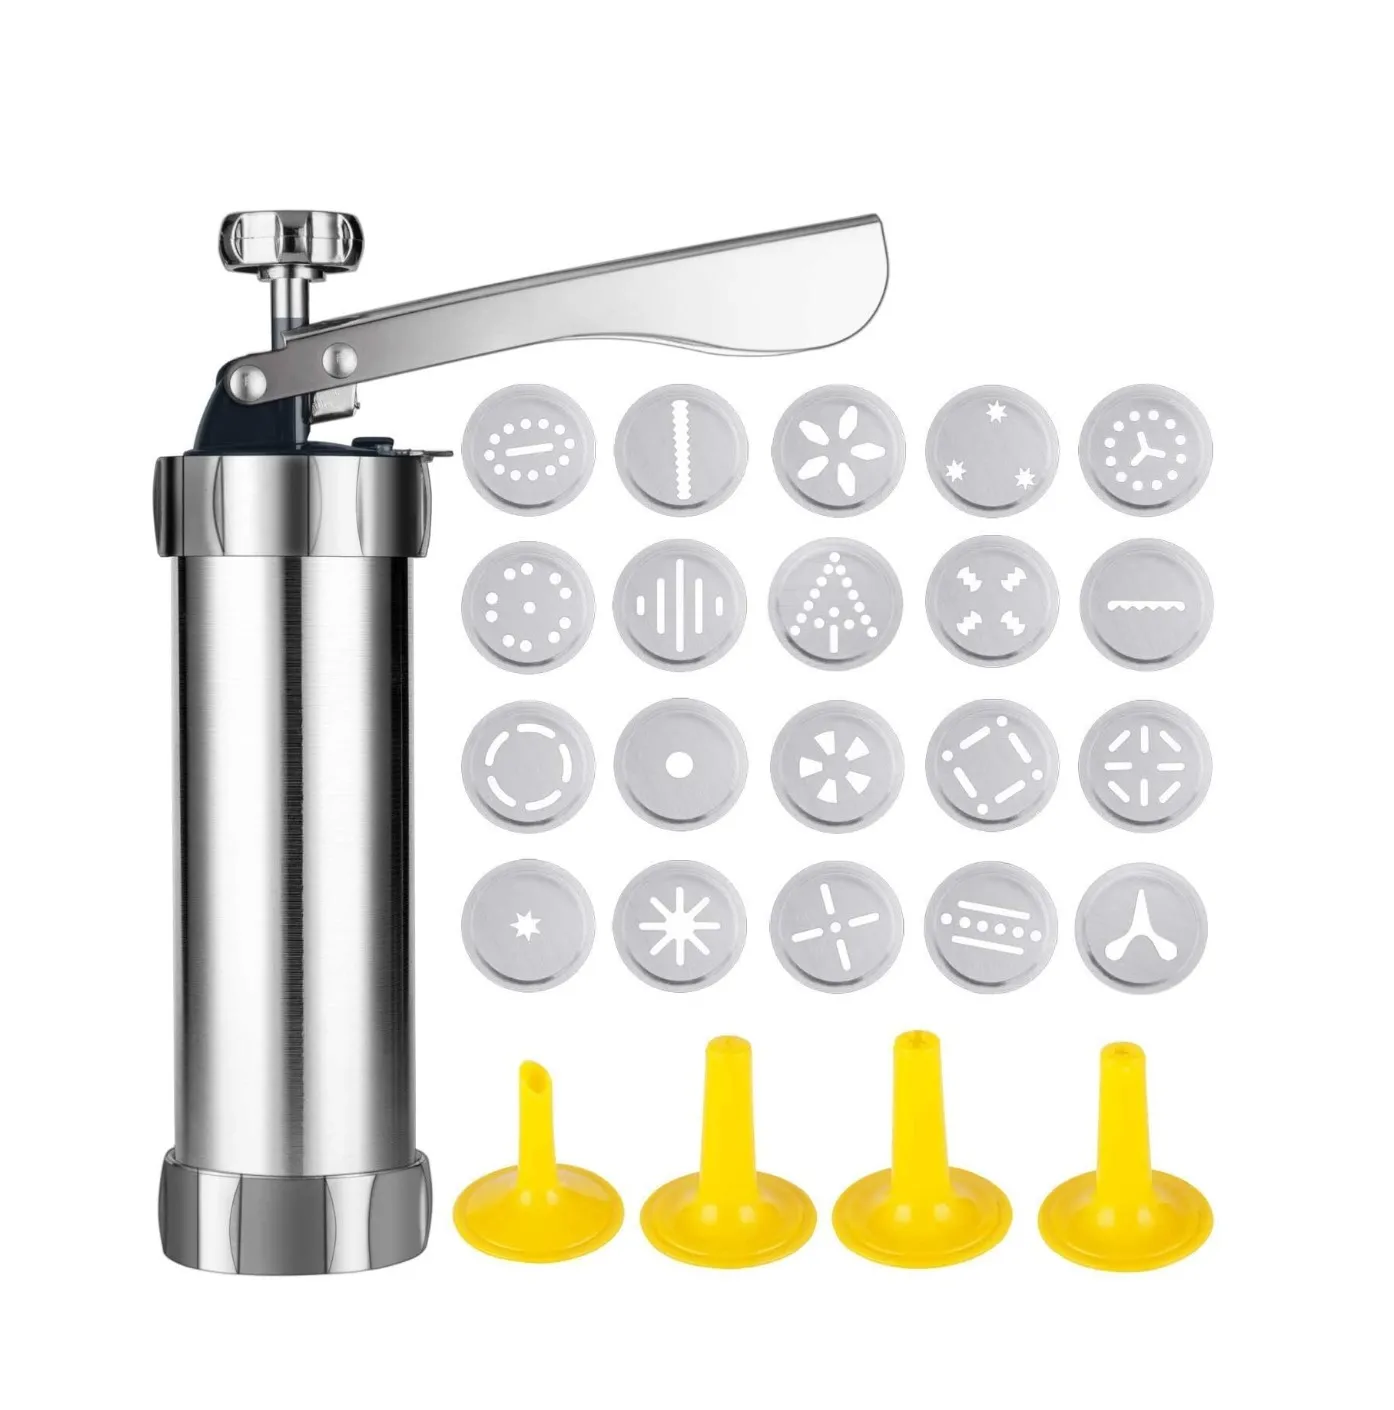 

Stainless Steel Biscuit Press Cookie Gun Set with 20 Discs and 4 Icing Tips Metal Cookie Press Cake Decorating Gun Biscuit Maker, Silver